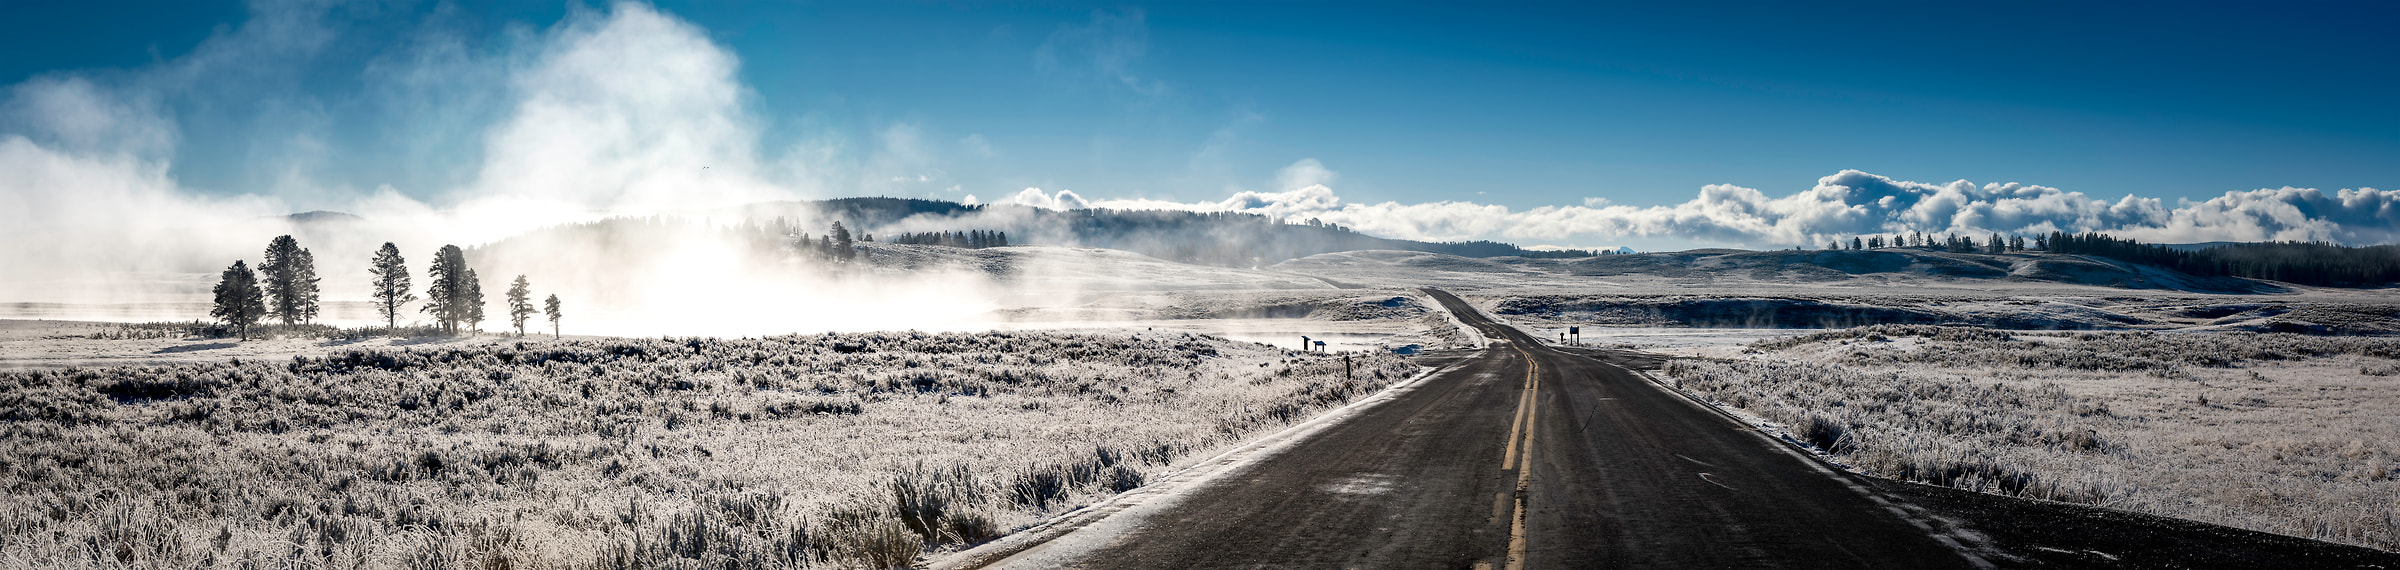 396 megapixels! A very high resolution, large-format VAST photo print of snow in Yellowstone National Park with a road heading off into the distance and trees on a hill; photo created by Justin Katz in Wyoming